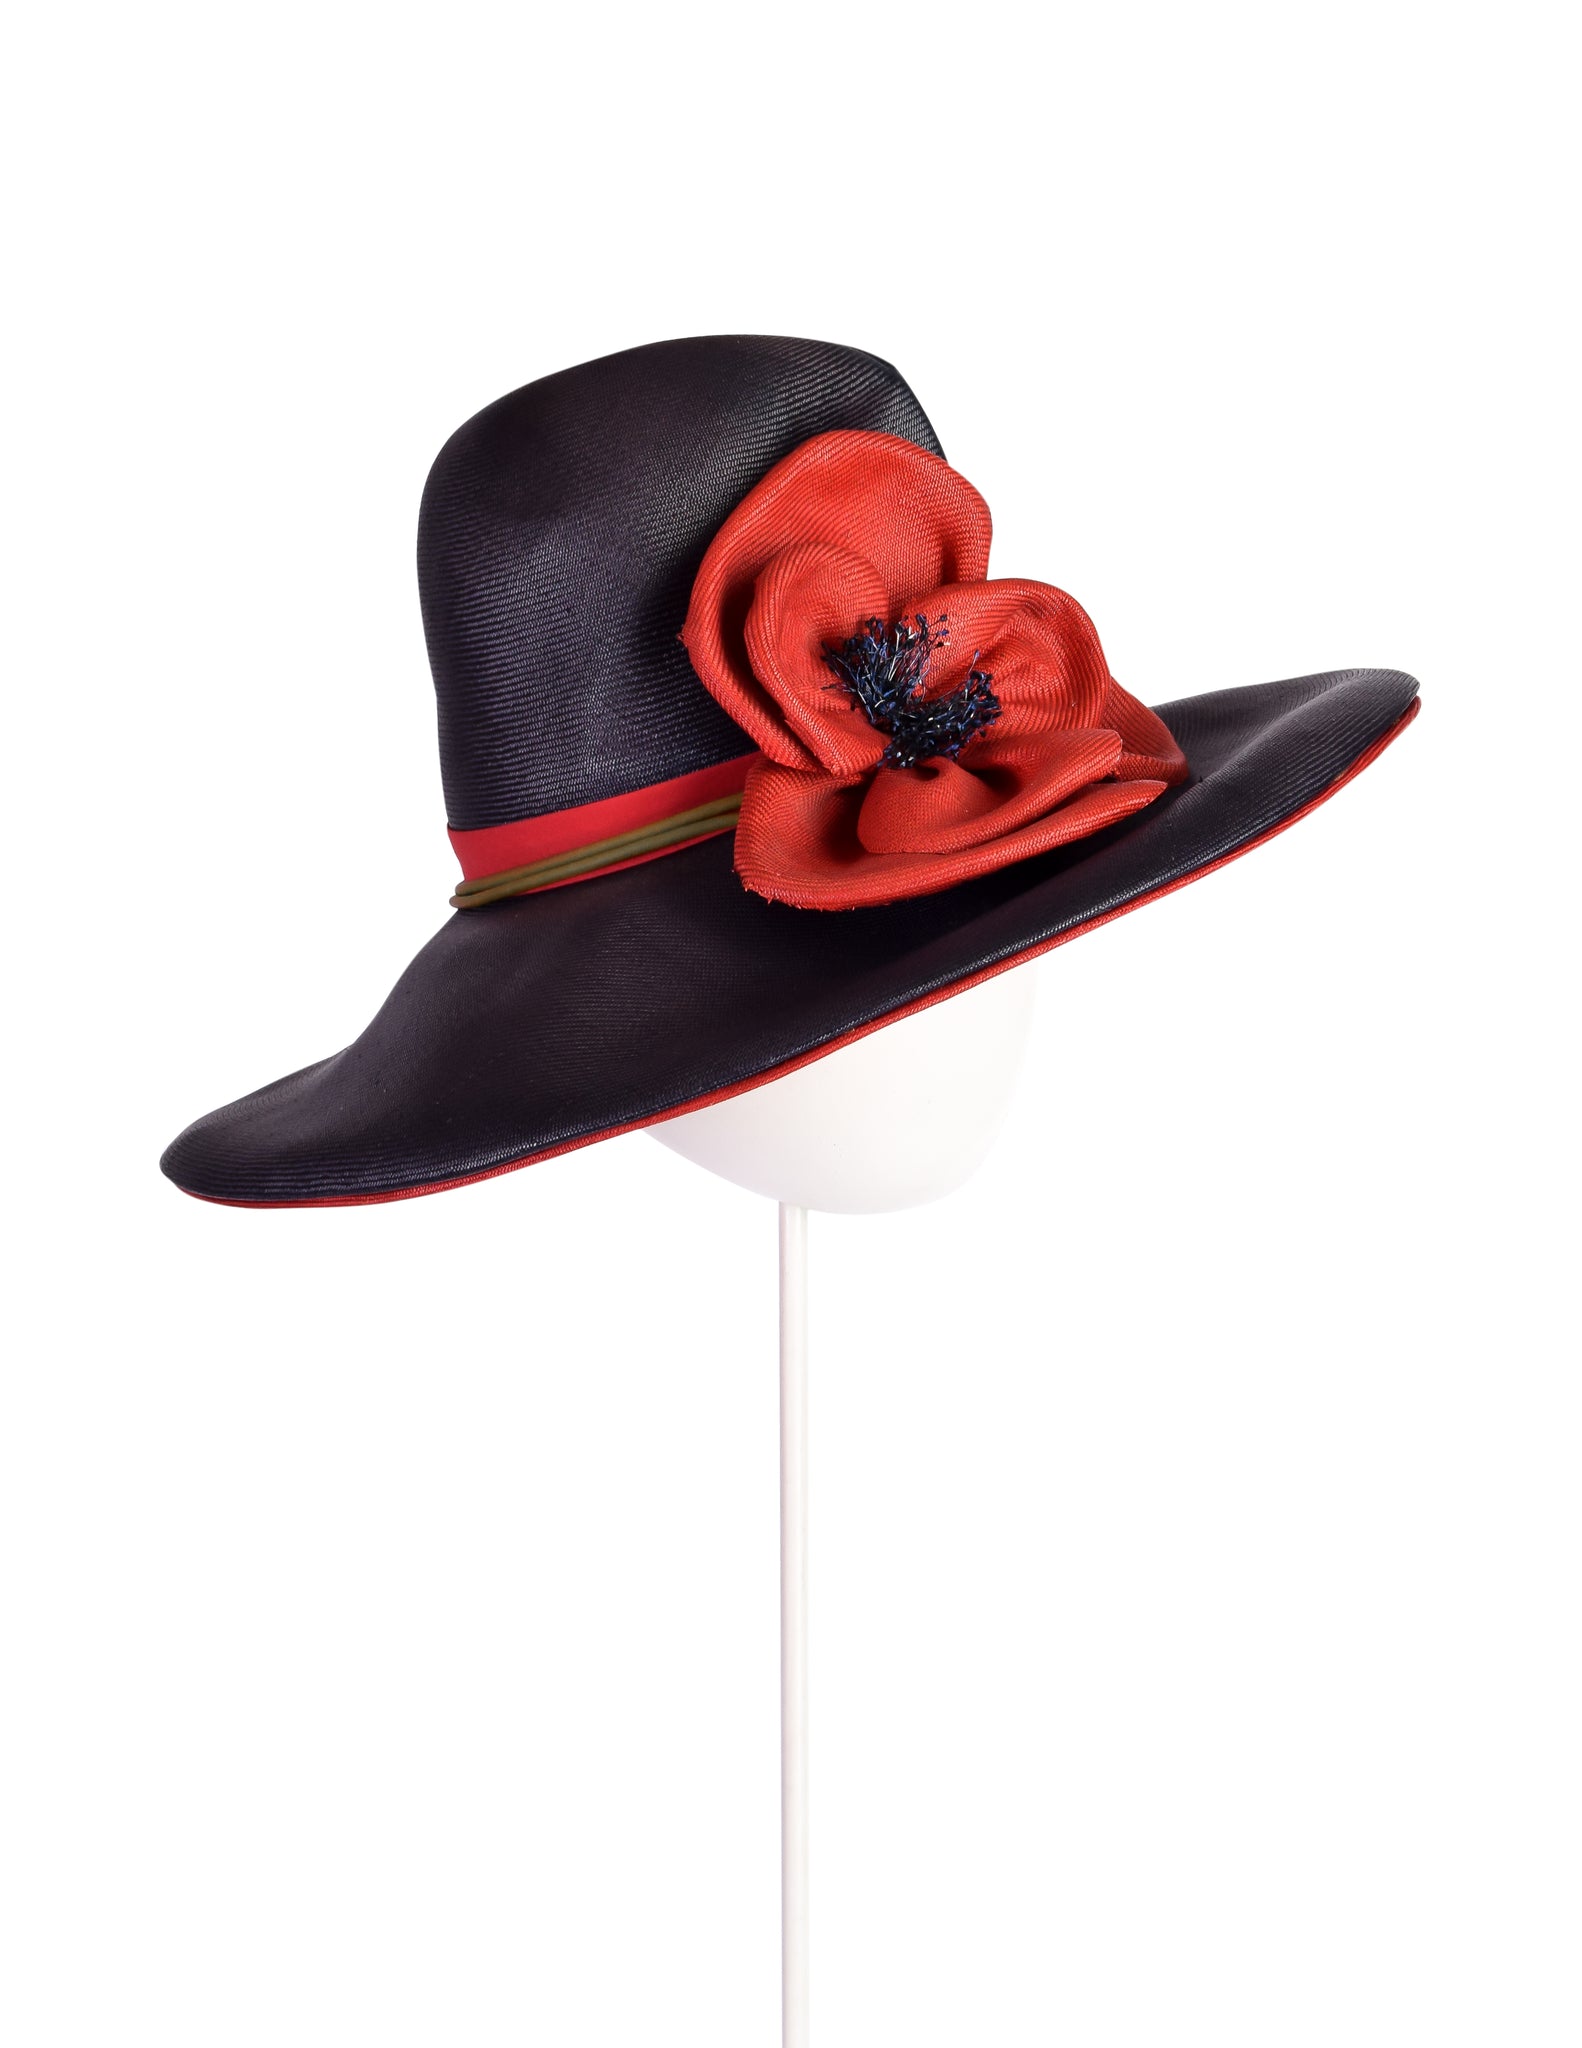 Christian Dior Chapeaux Vintage Blue and Red Flower Straw Hat